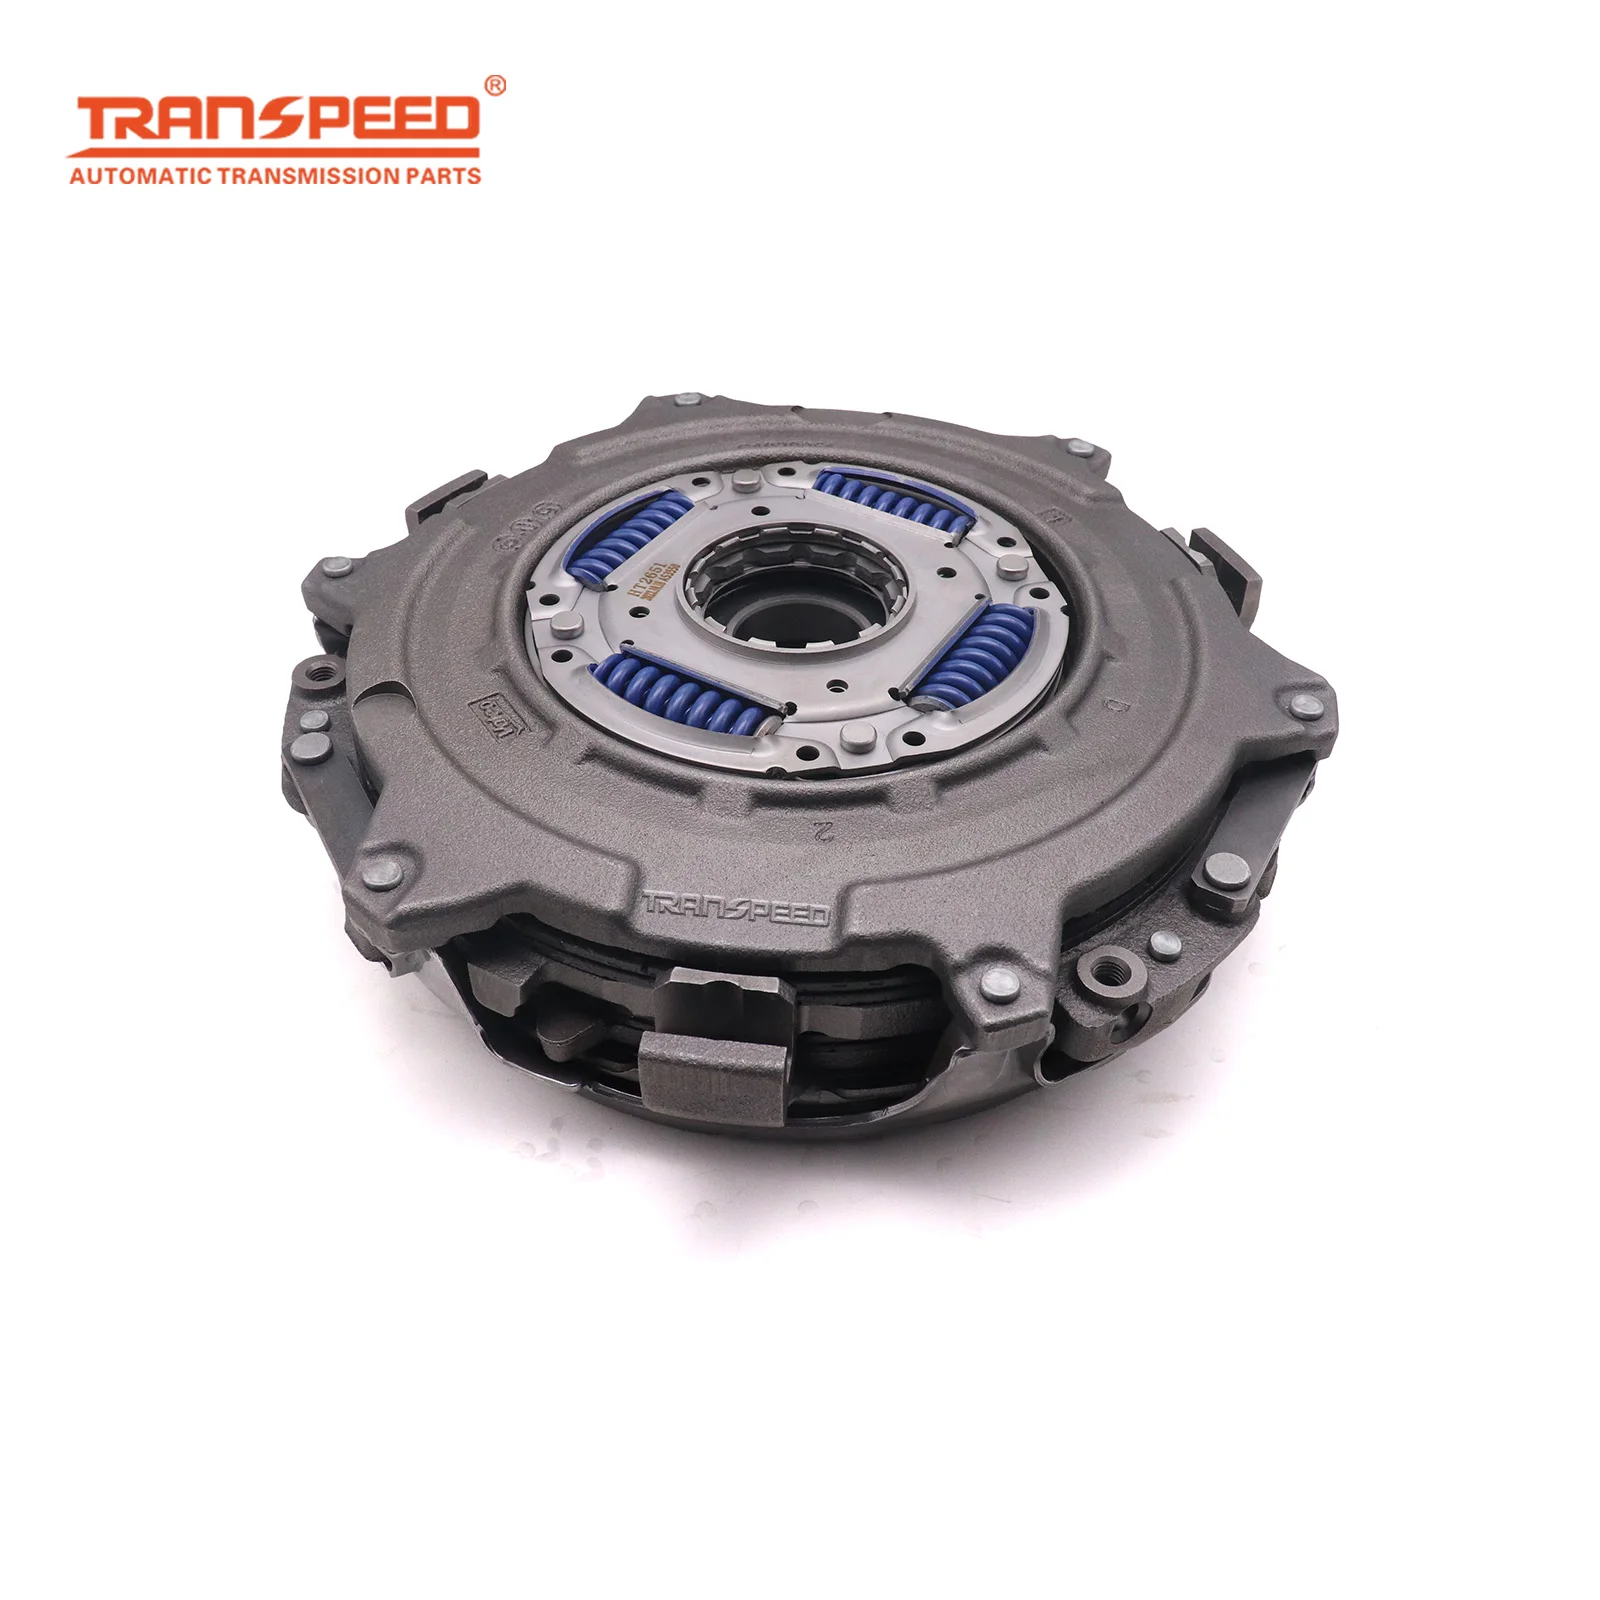 TRANSPEED 7DCT250 Auto Transmission Second Generation Clutch